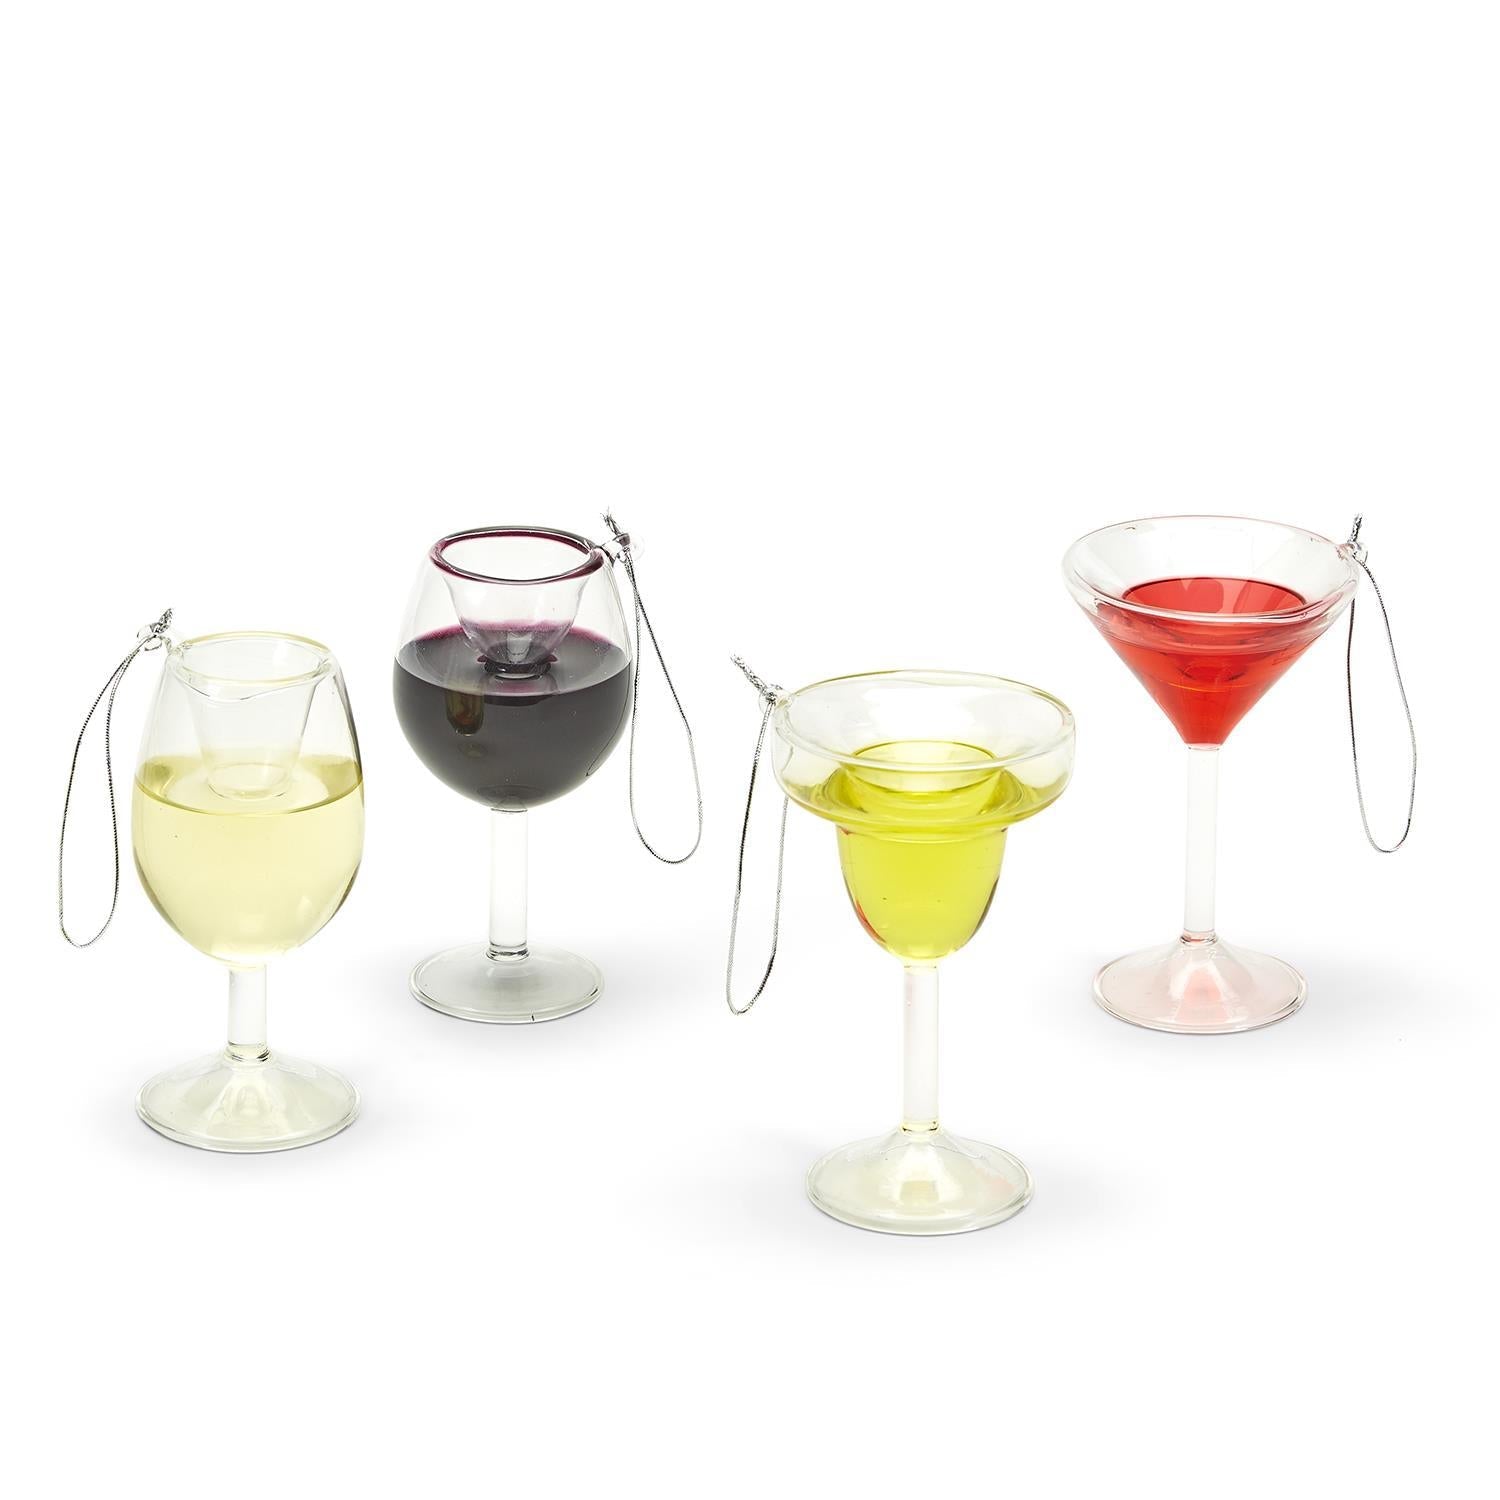 Set of 12 Happy Hour Hand-Crafted Glass Ornament | Real Liquid Inside | Wine, Martini, or Margarita